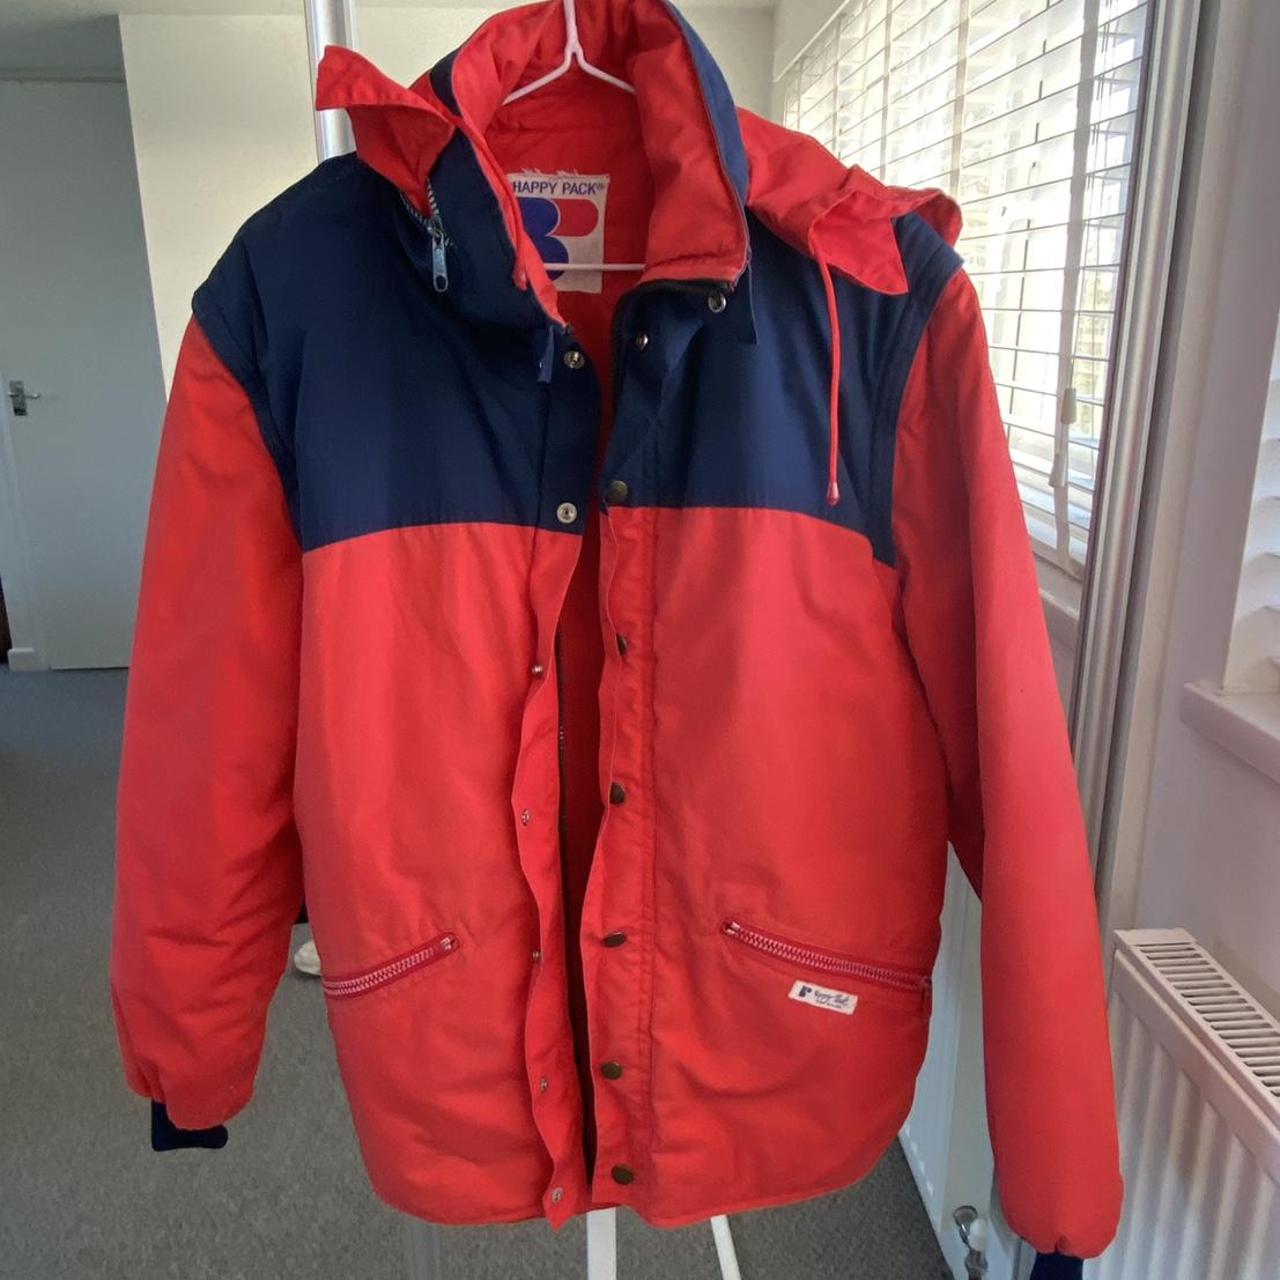 Puffa Men's Red and Navy Jacket | Depop